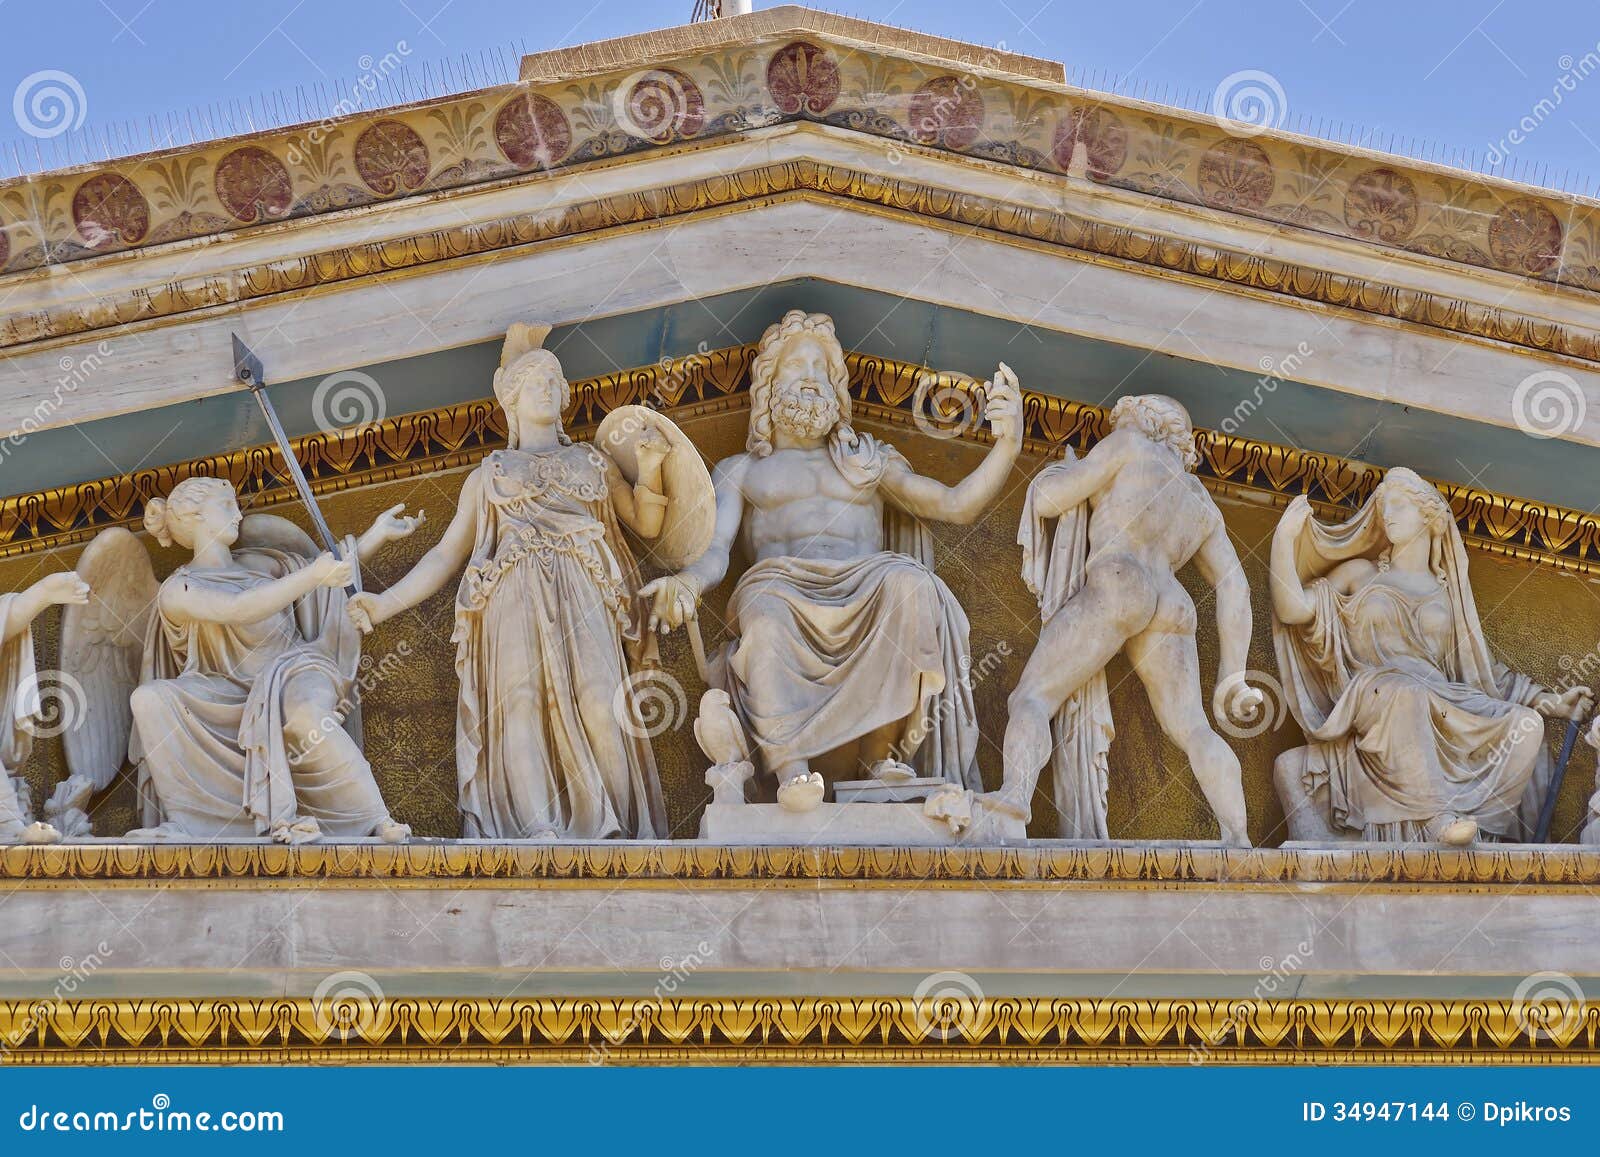 zeus, athena and other ancient greek gods and deities